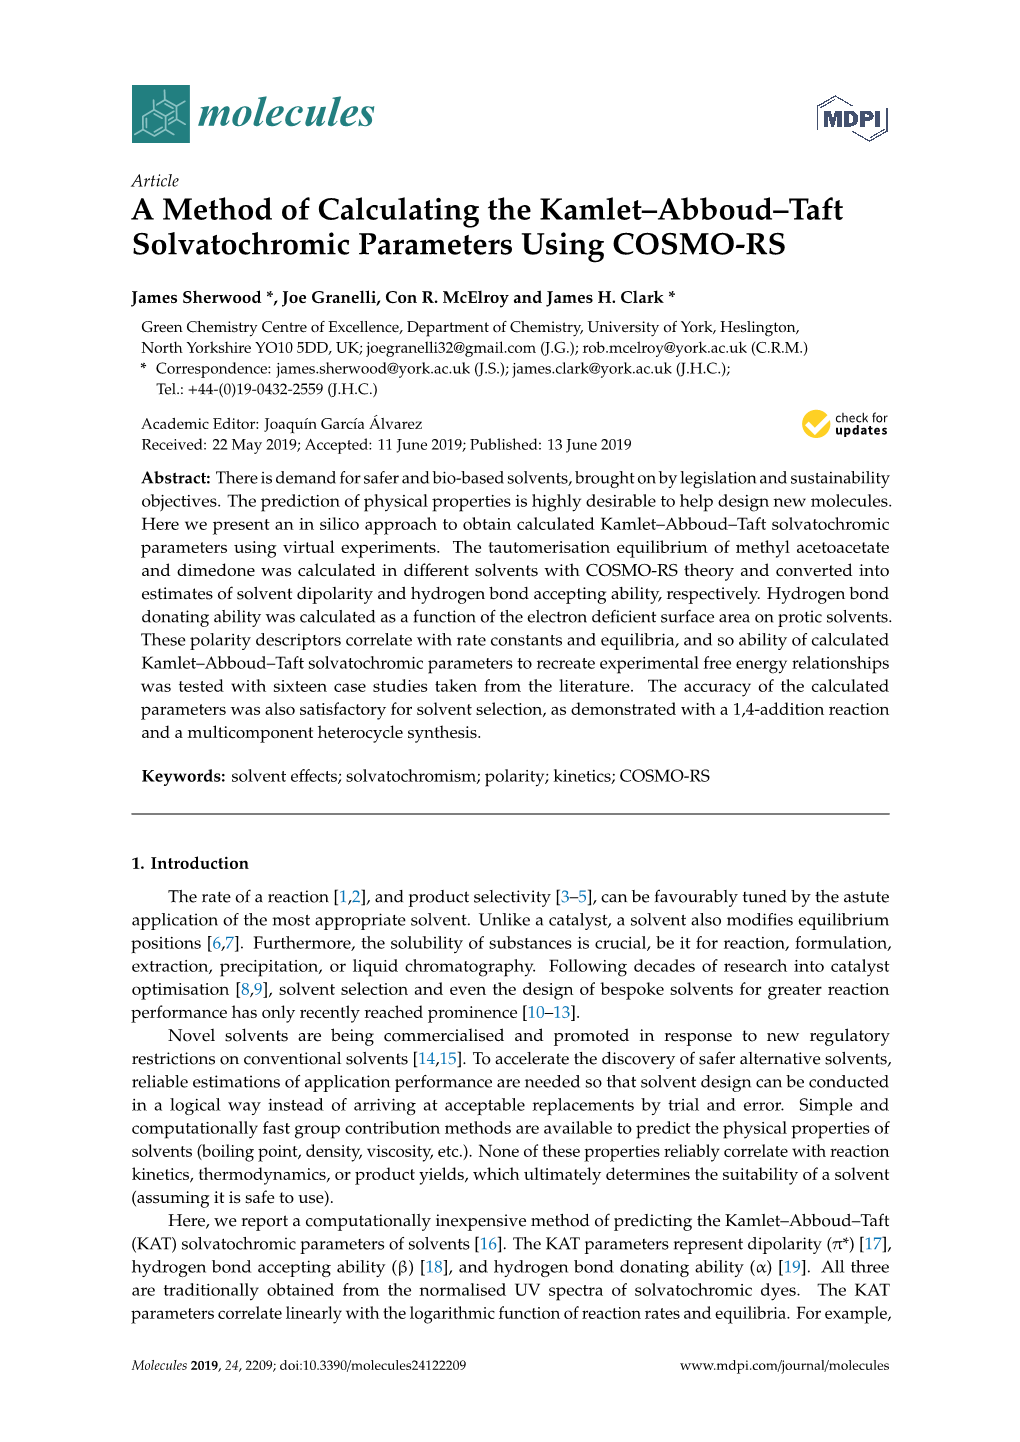 A Method of Calculating the Kamlet–Abboud–Taft Solvatochromic Parameters Using COSMO-RS